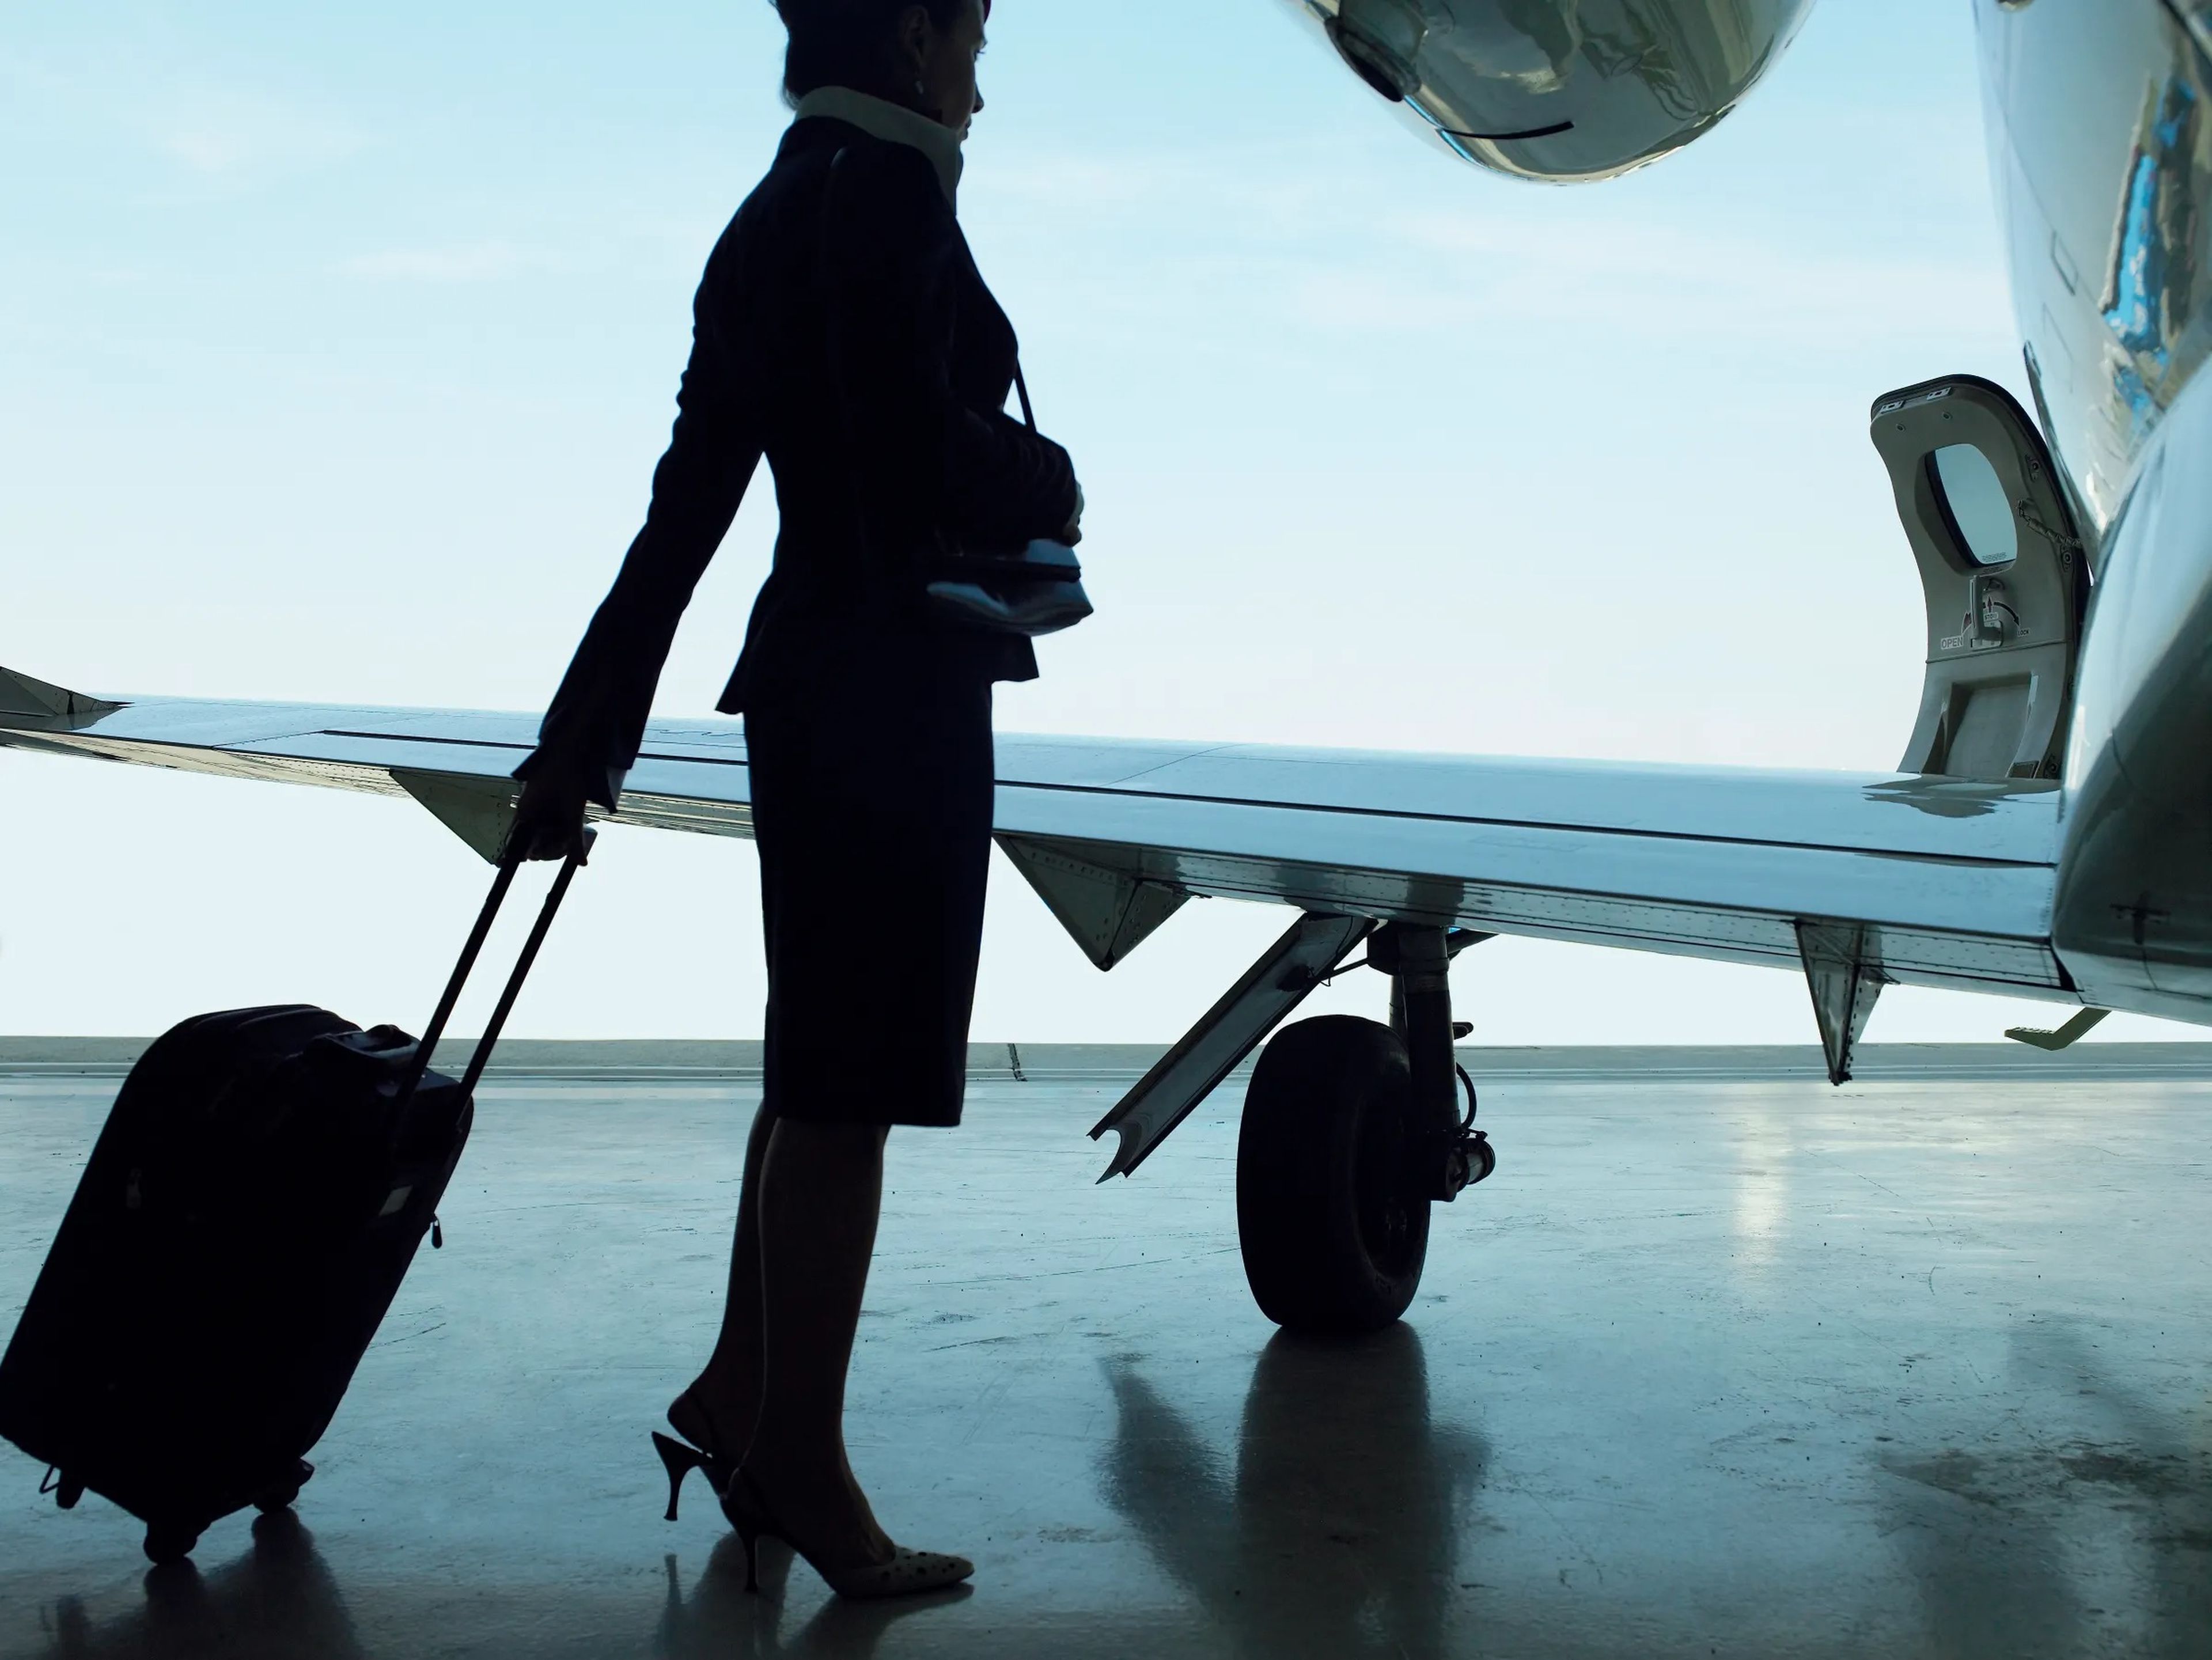 stock image of flight attendant in uniform holding roller suitcase by plane wing